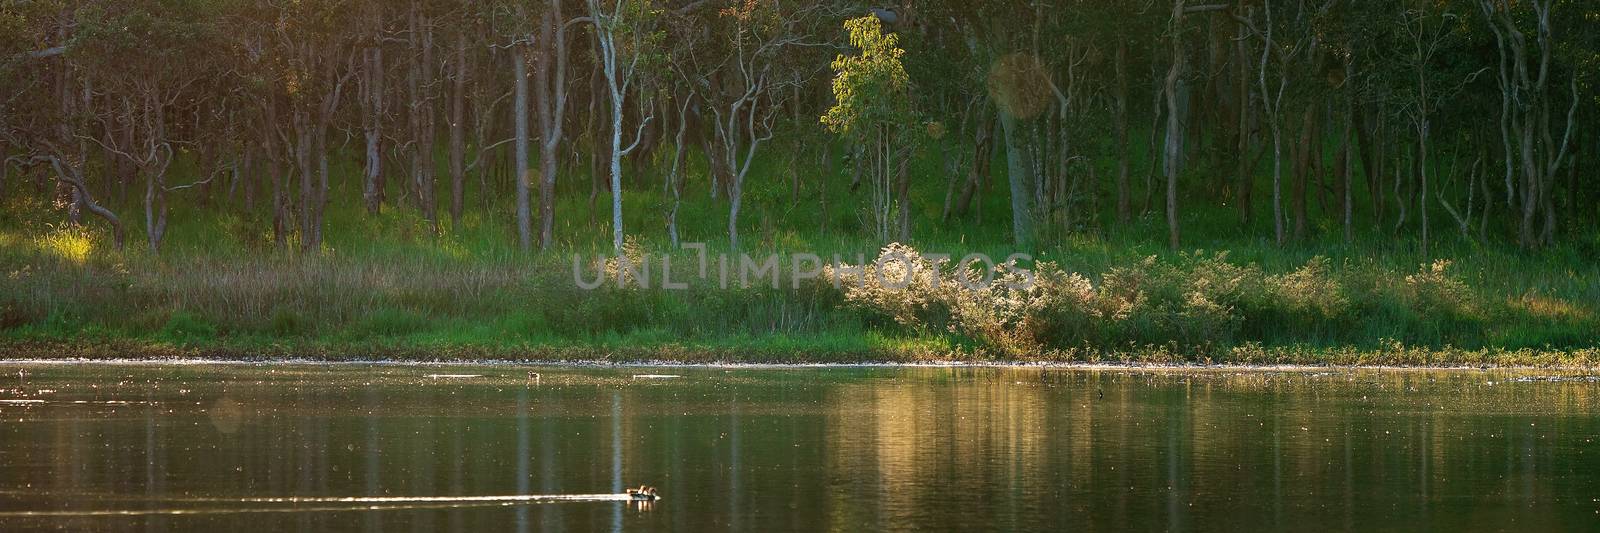 Ducks swimming peacefully on a calm pond with beautiful late afternoon light through the forest and on the water